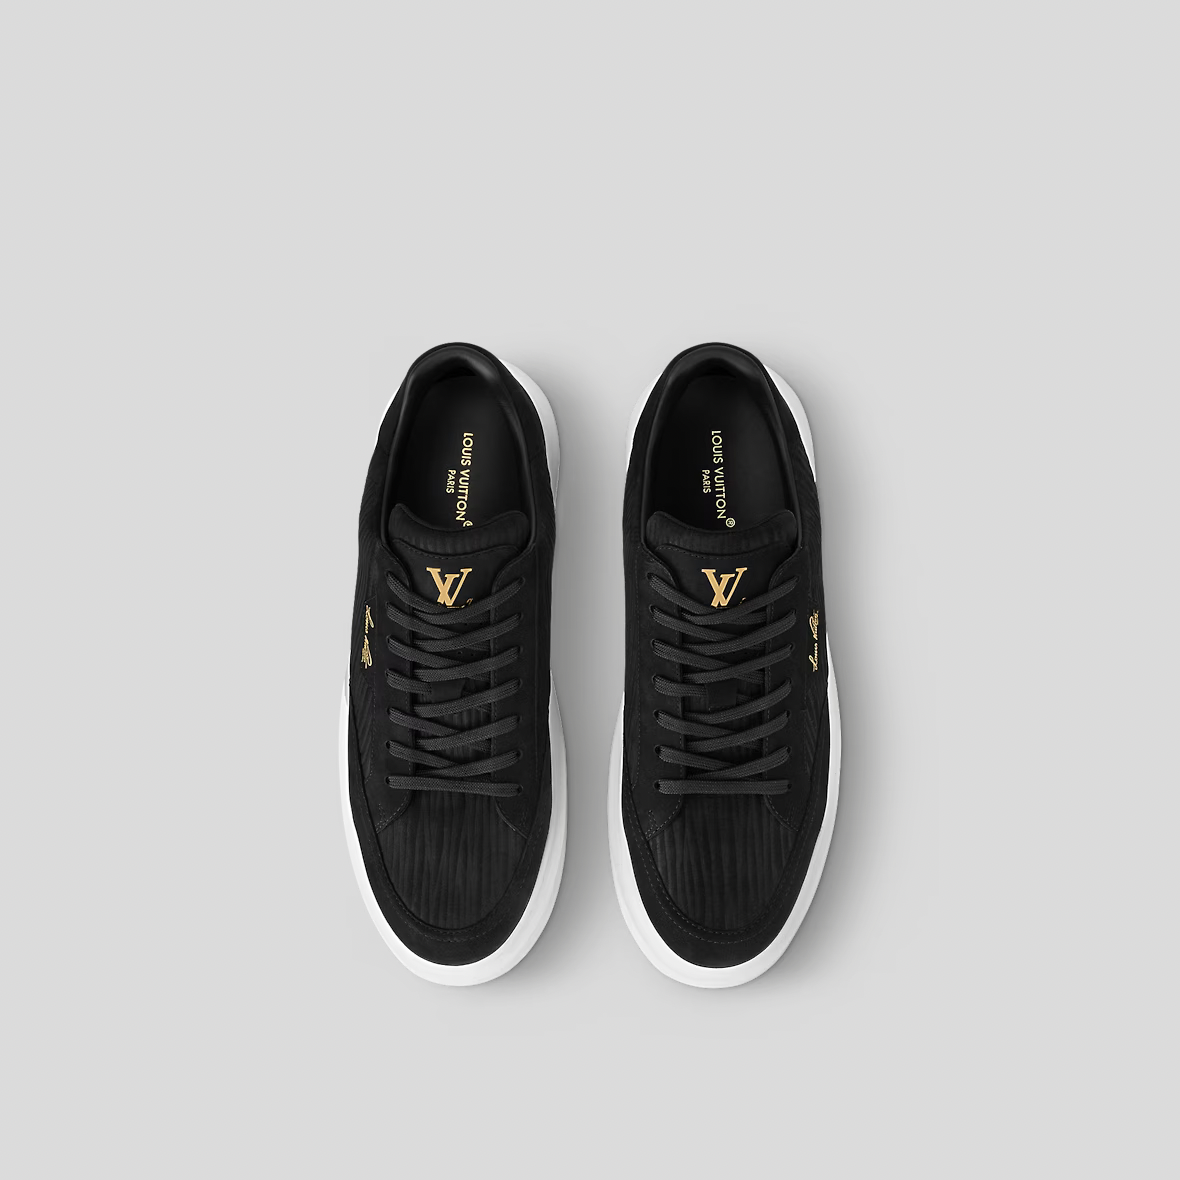 Louis Vuitton Beverly Hills Sneakers "Black"